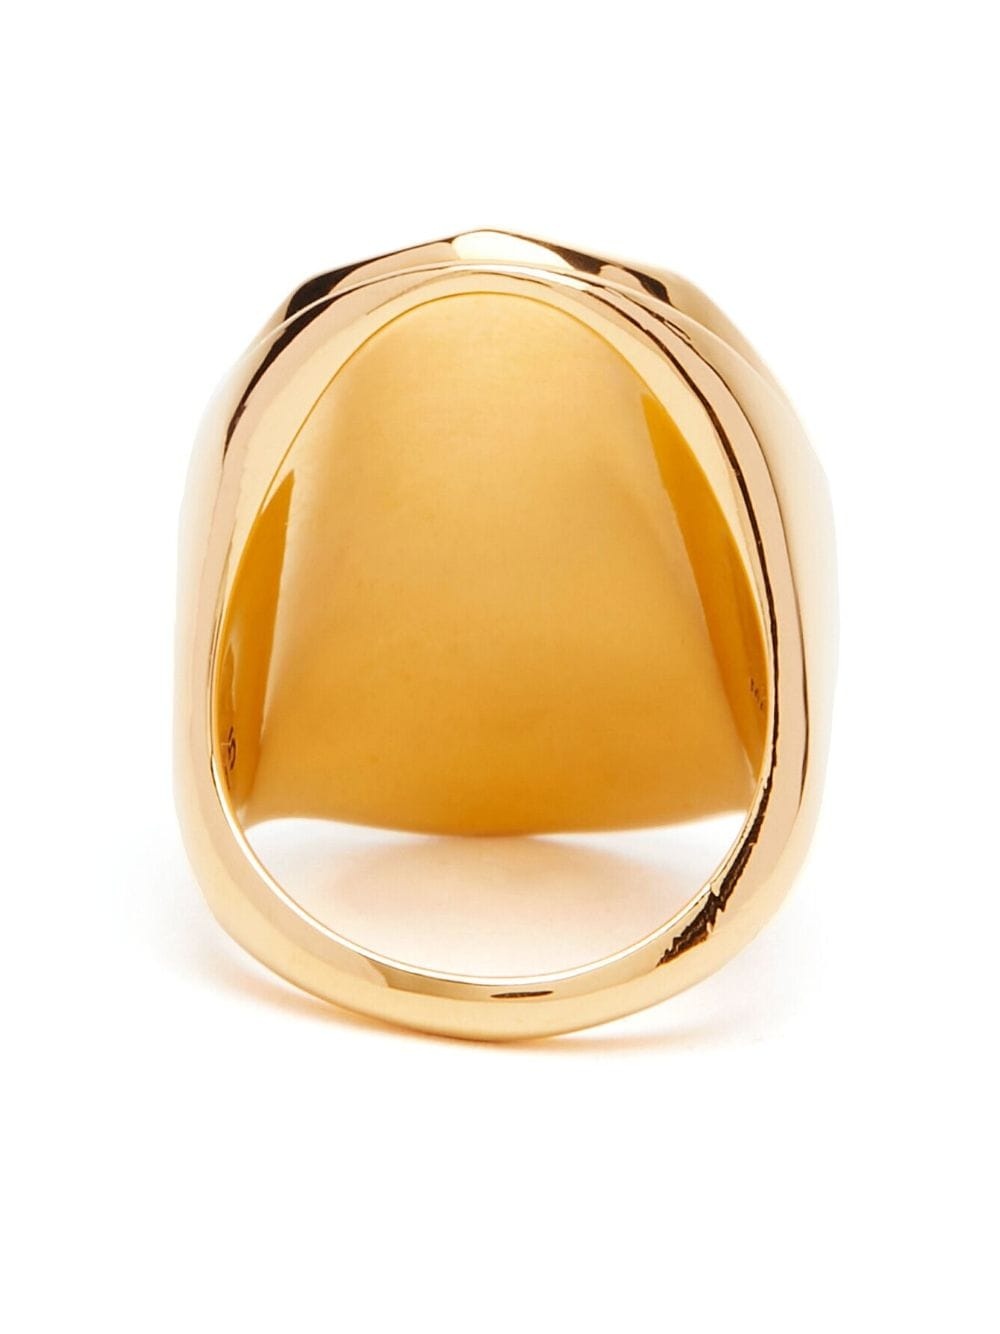 The Faceted Stone ring - 3